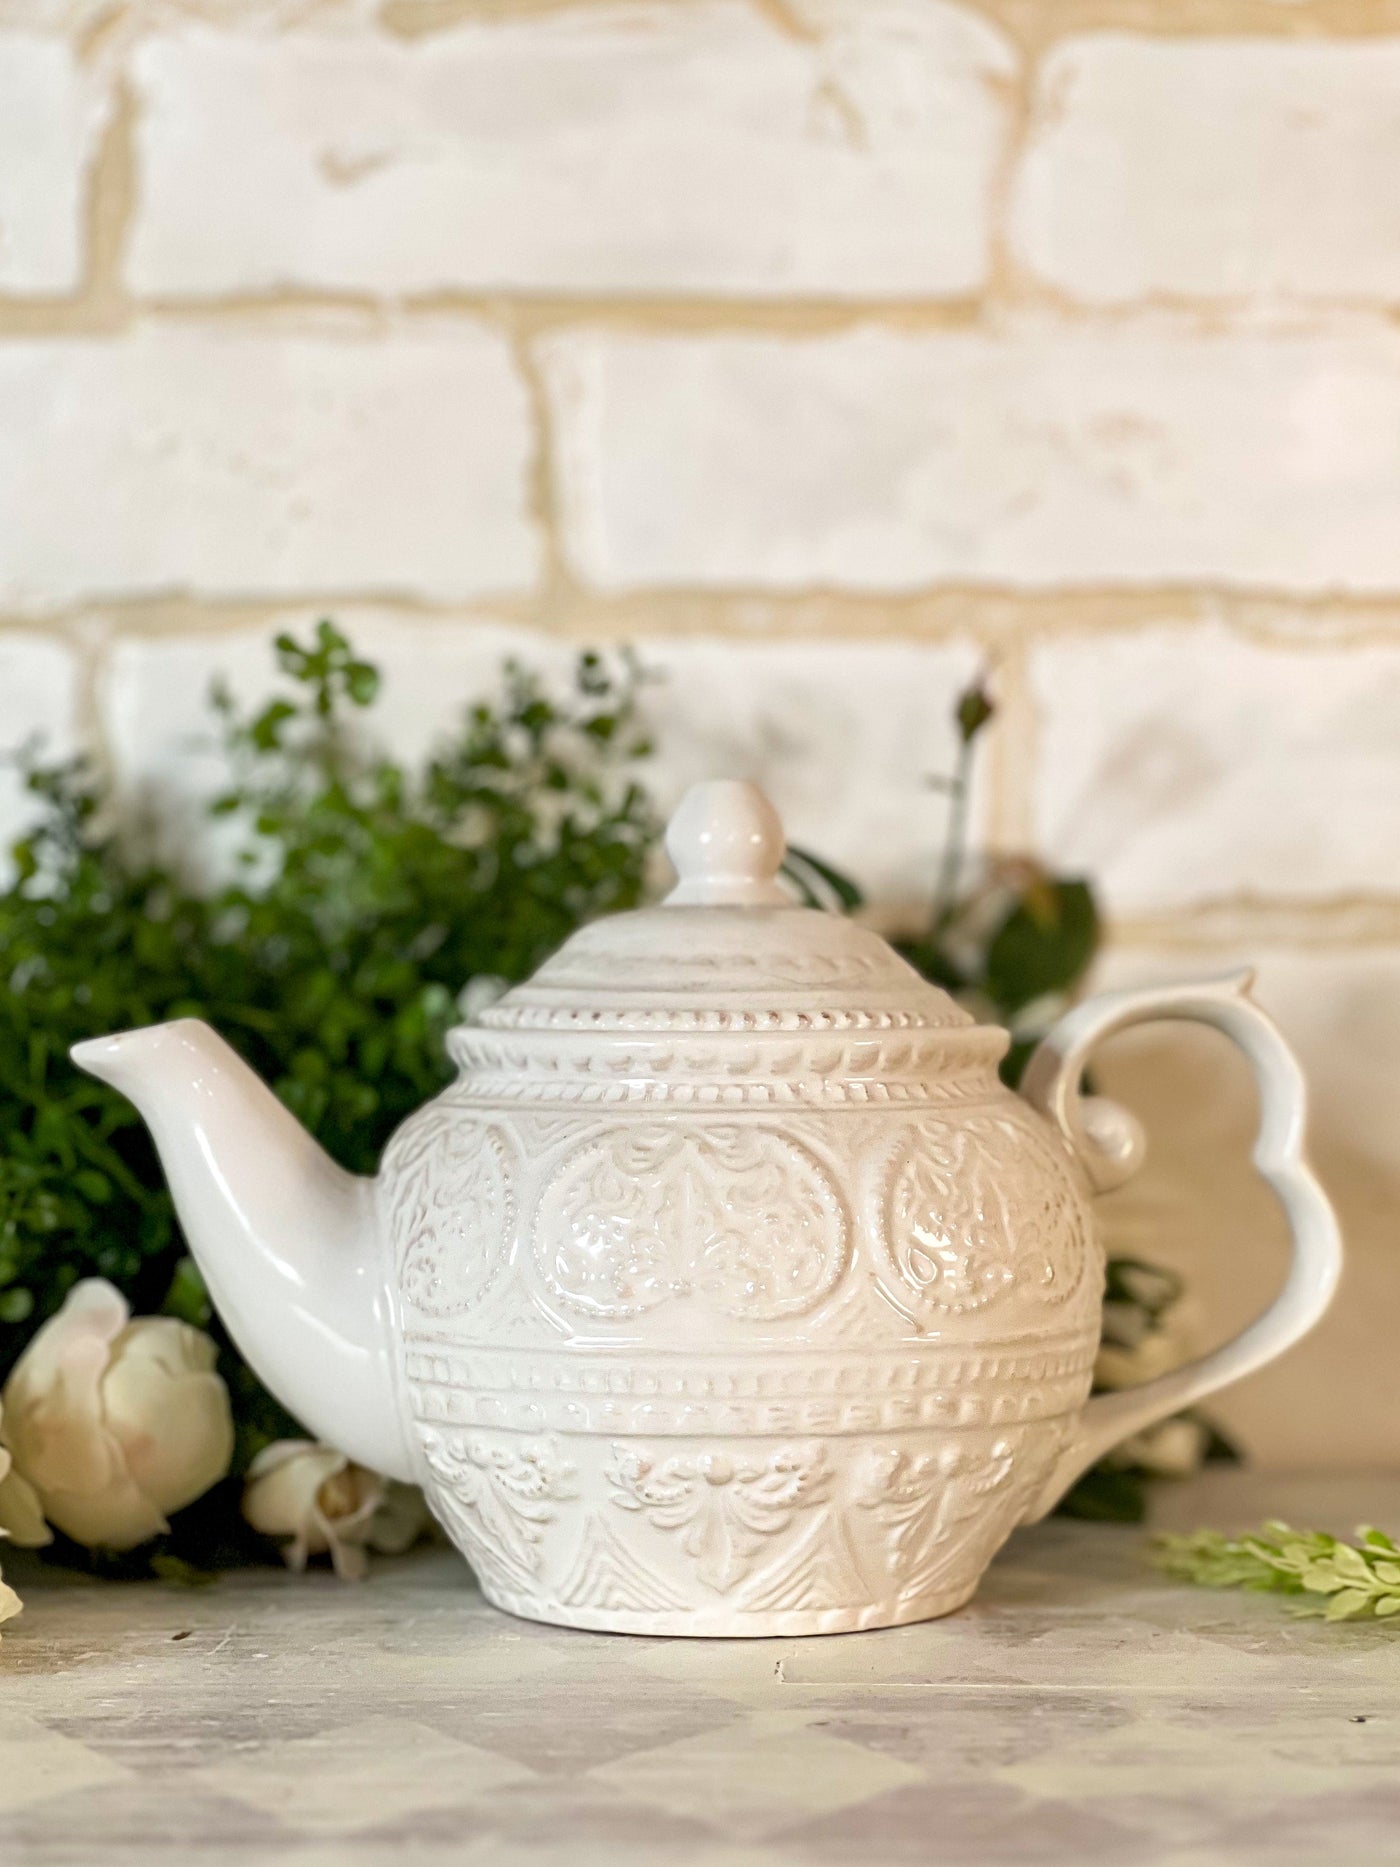 WHITE RAISED PATTERNED TEAPOT Revive In Style Vintage Furniture Painted Refinished Redesign Beautiful One of a Kind Artistic Antique Unique Home Decor Interior Design French Country Shabby Chic Cottage Farmhouse Grandmillenial Coastal Chalk Paint Metallic Glam Eclectic Quality Dovetailed Rustic Furniture Painter Pinterest Bedroom Living Room Entryway Kitchen Home Trends House Styles Decorating ideas